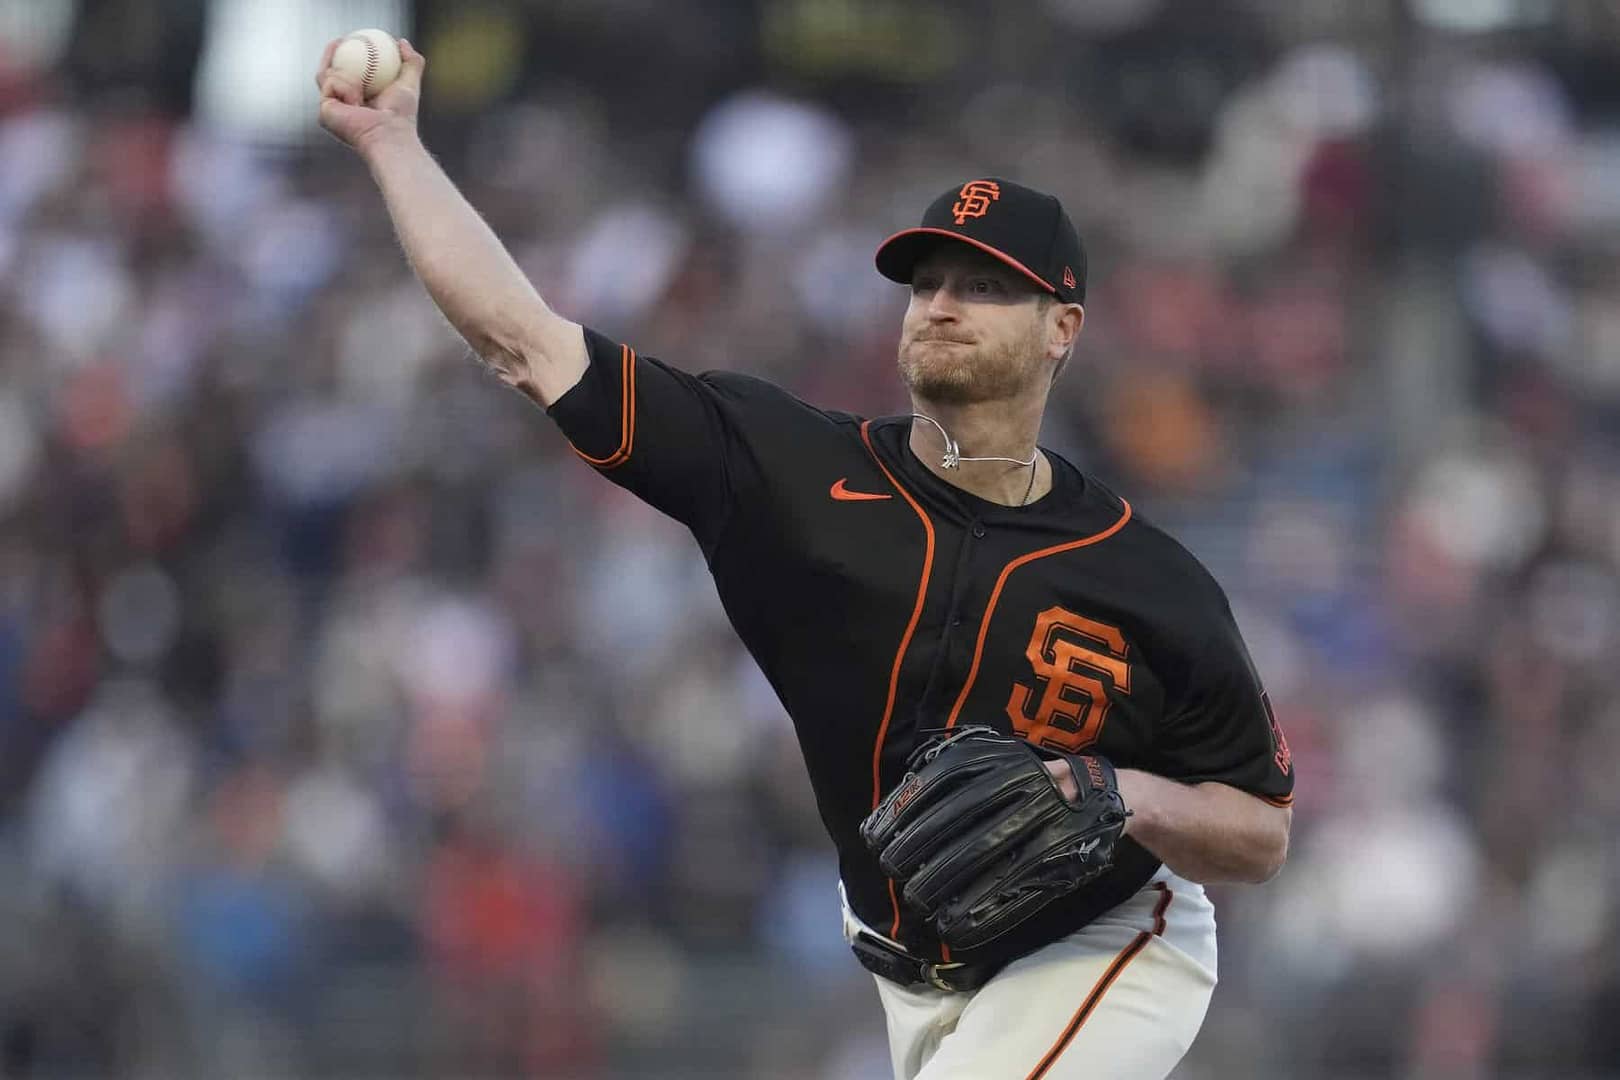 The best Giants-Athletics MLB prediction and picks to know for Tuesday's game is an under hits prop bet on BetRivers with MLB odds of...